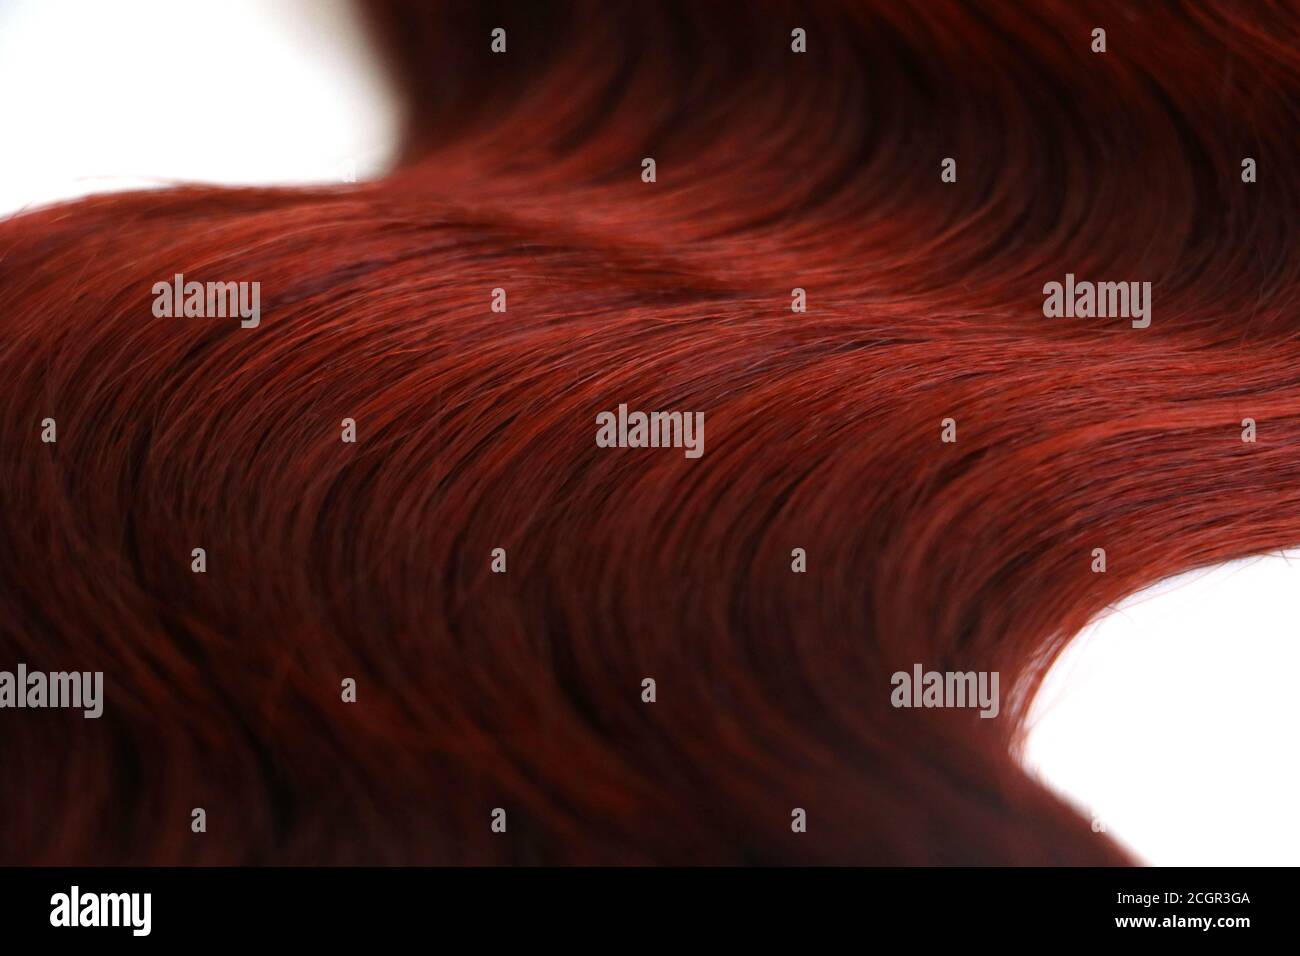 red auburn wavy hair piece isolated on white background Stock Photo